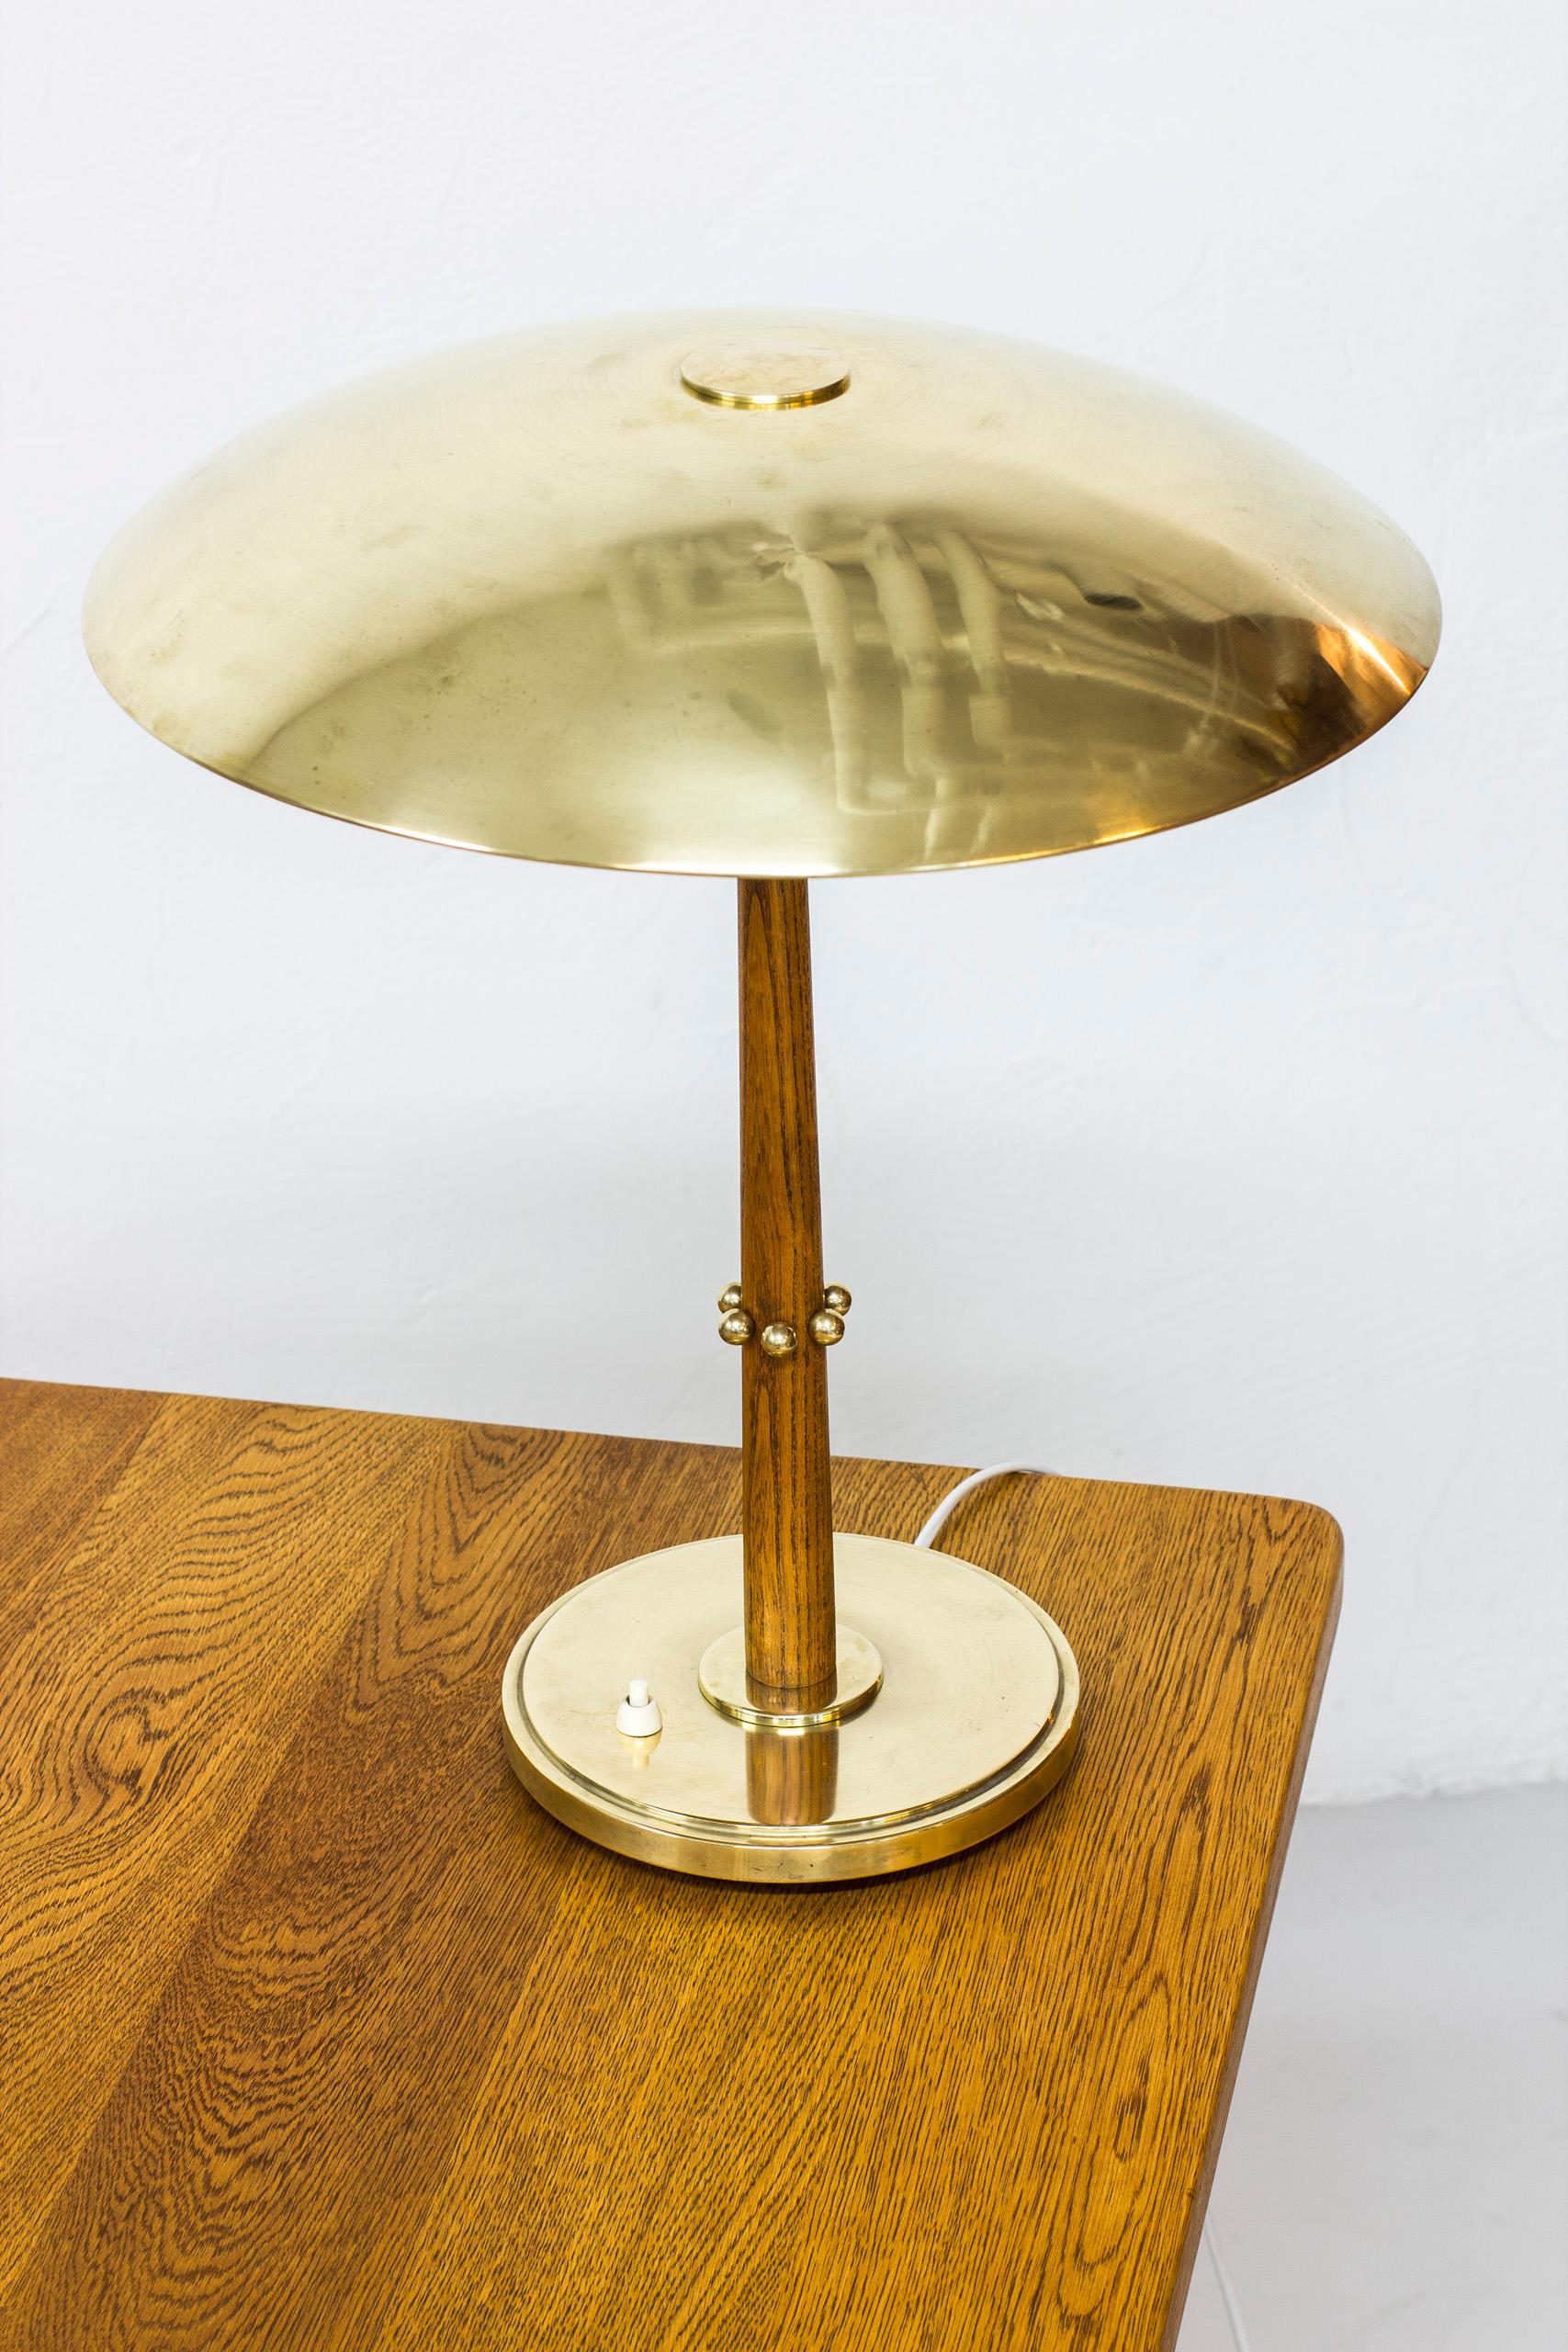 Table lamp designed by Harald Notini. Produced in Stockholm, Sweden by Böhlmarks during the 1940s. Made from solid polished brass with a stem of solid oak. Light switch on the base in working order. Good vintage condition with age related wear and